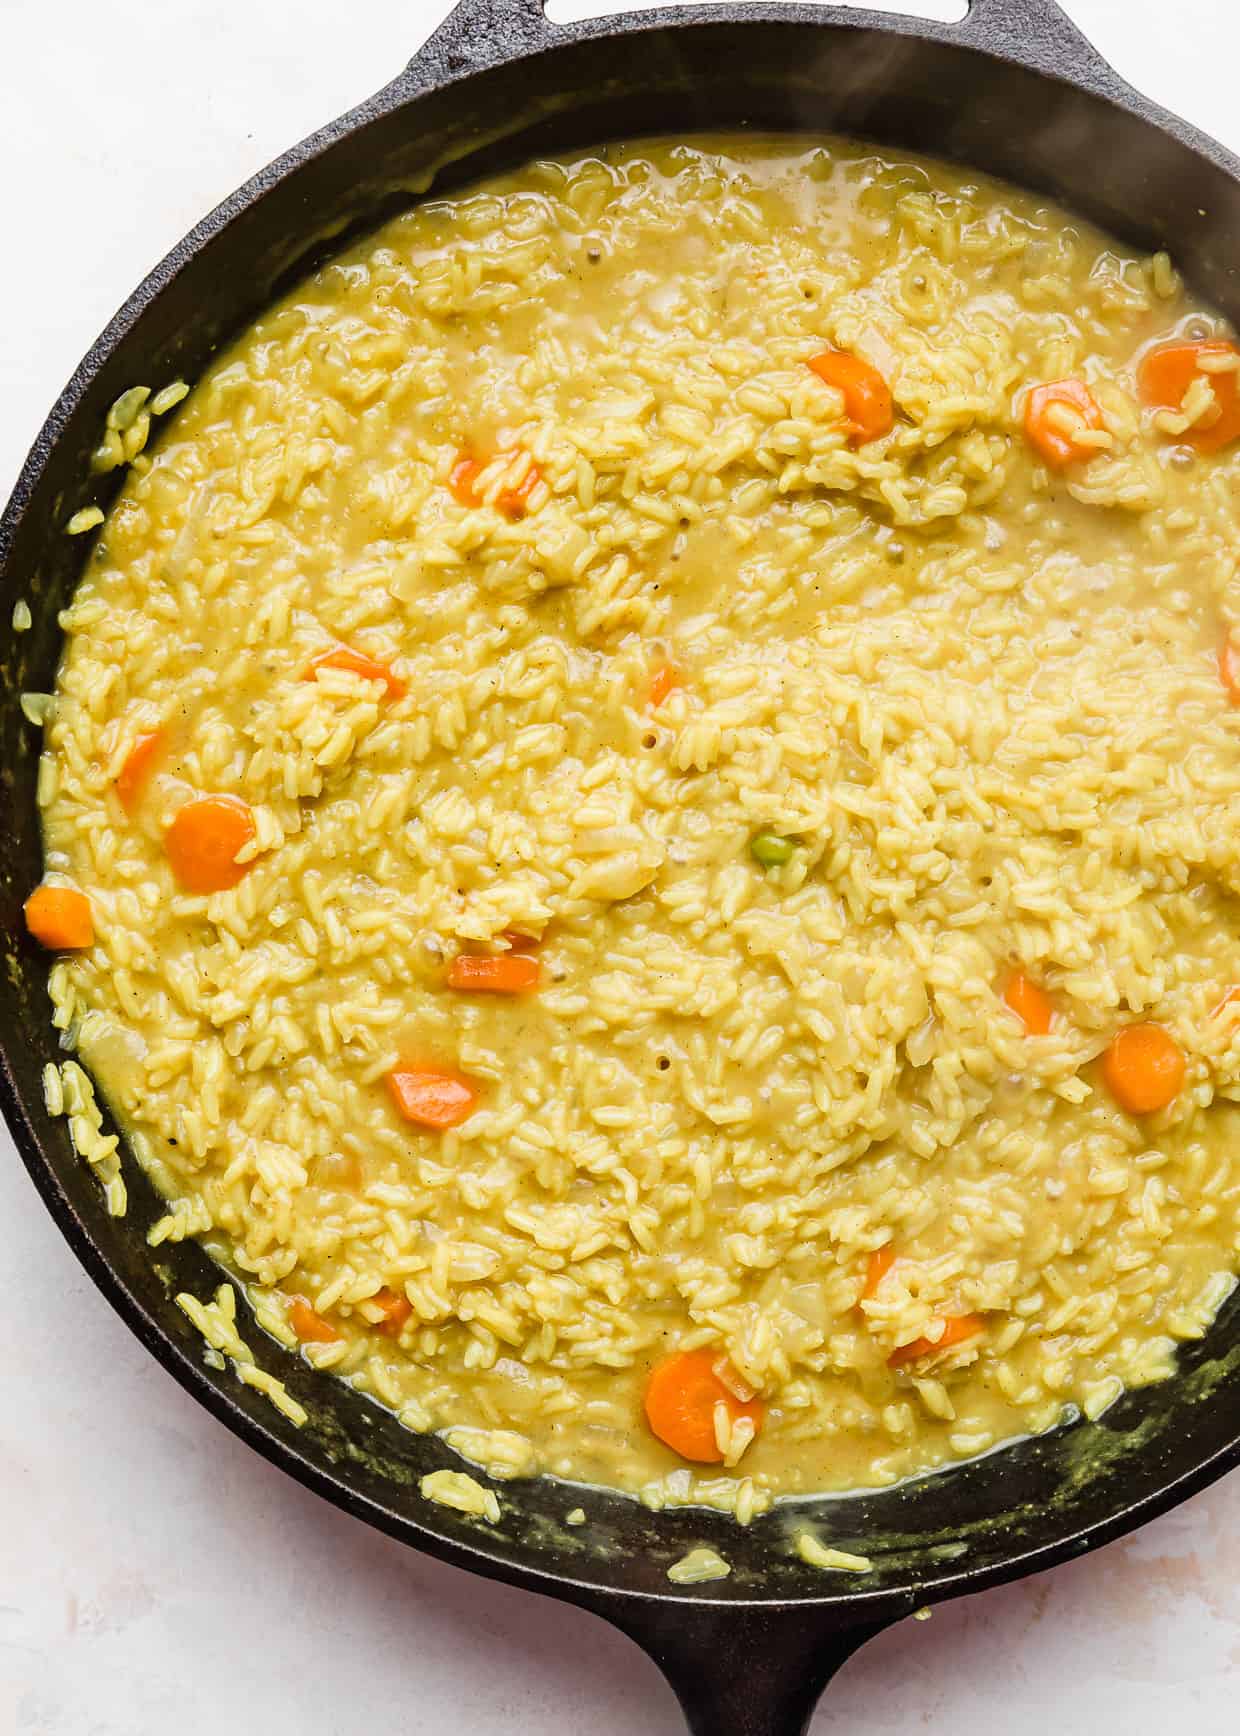 Rice and carrots in a curry rice mixture in a skillet.